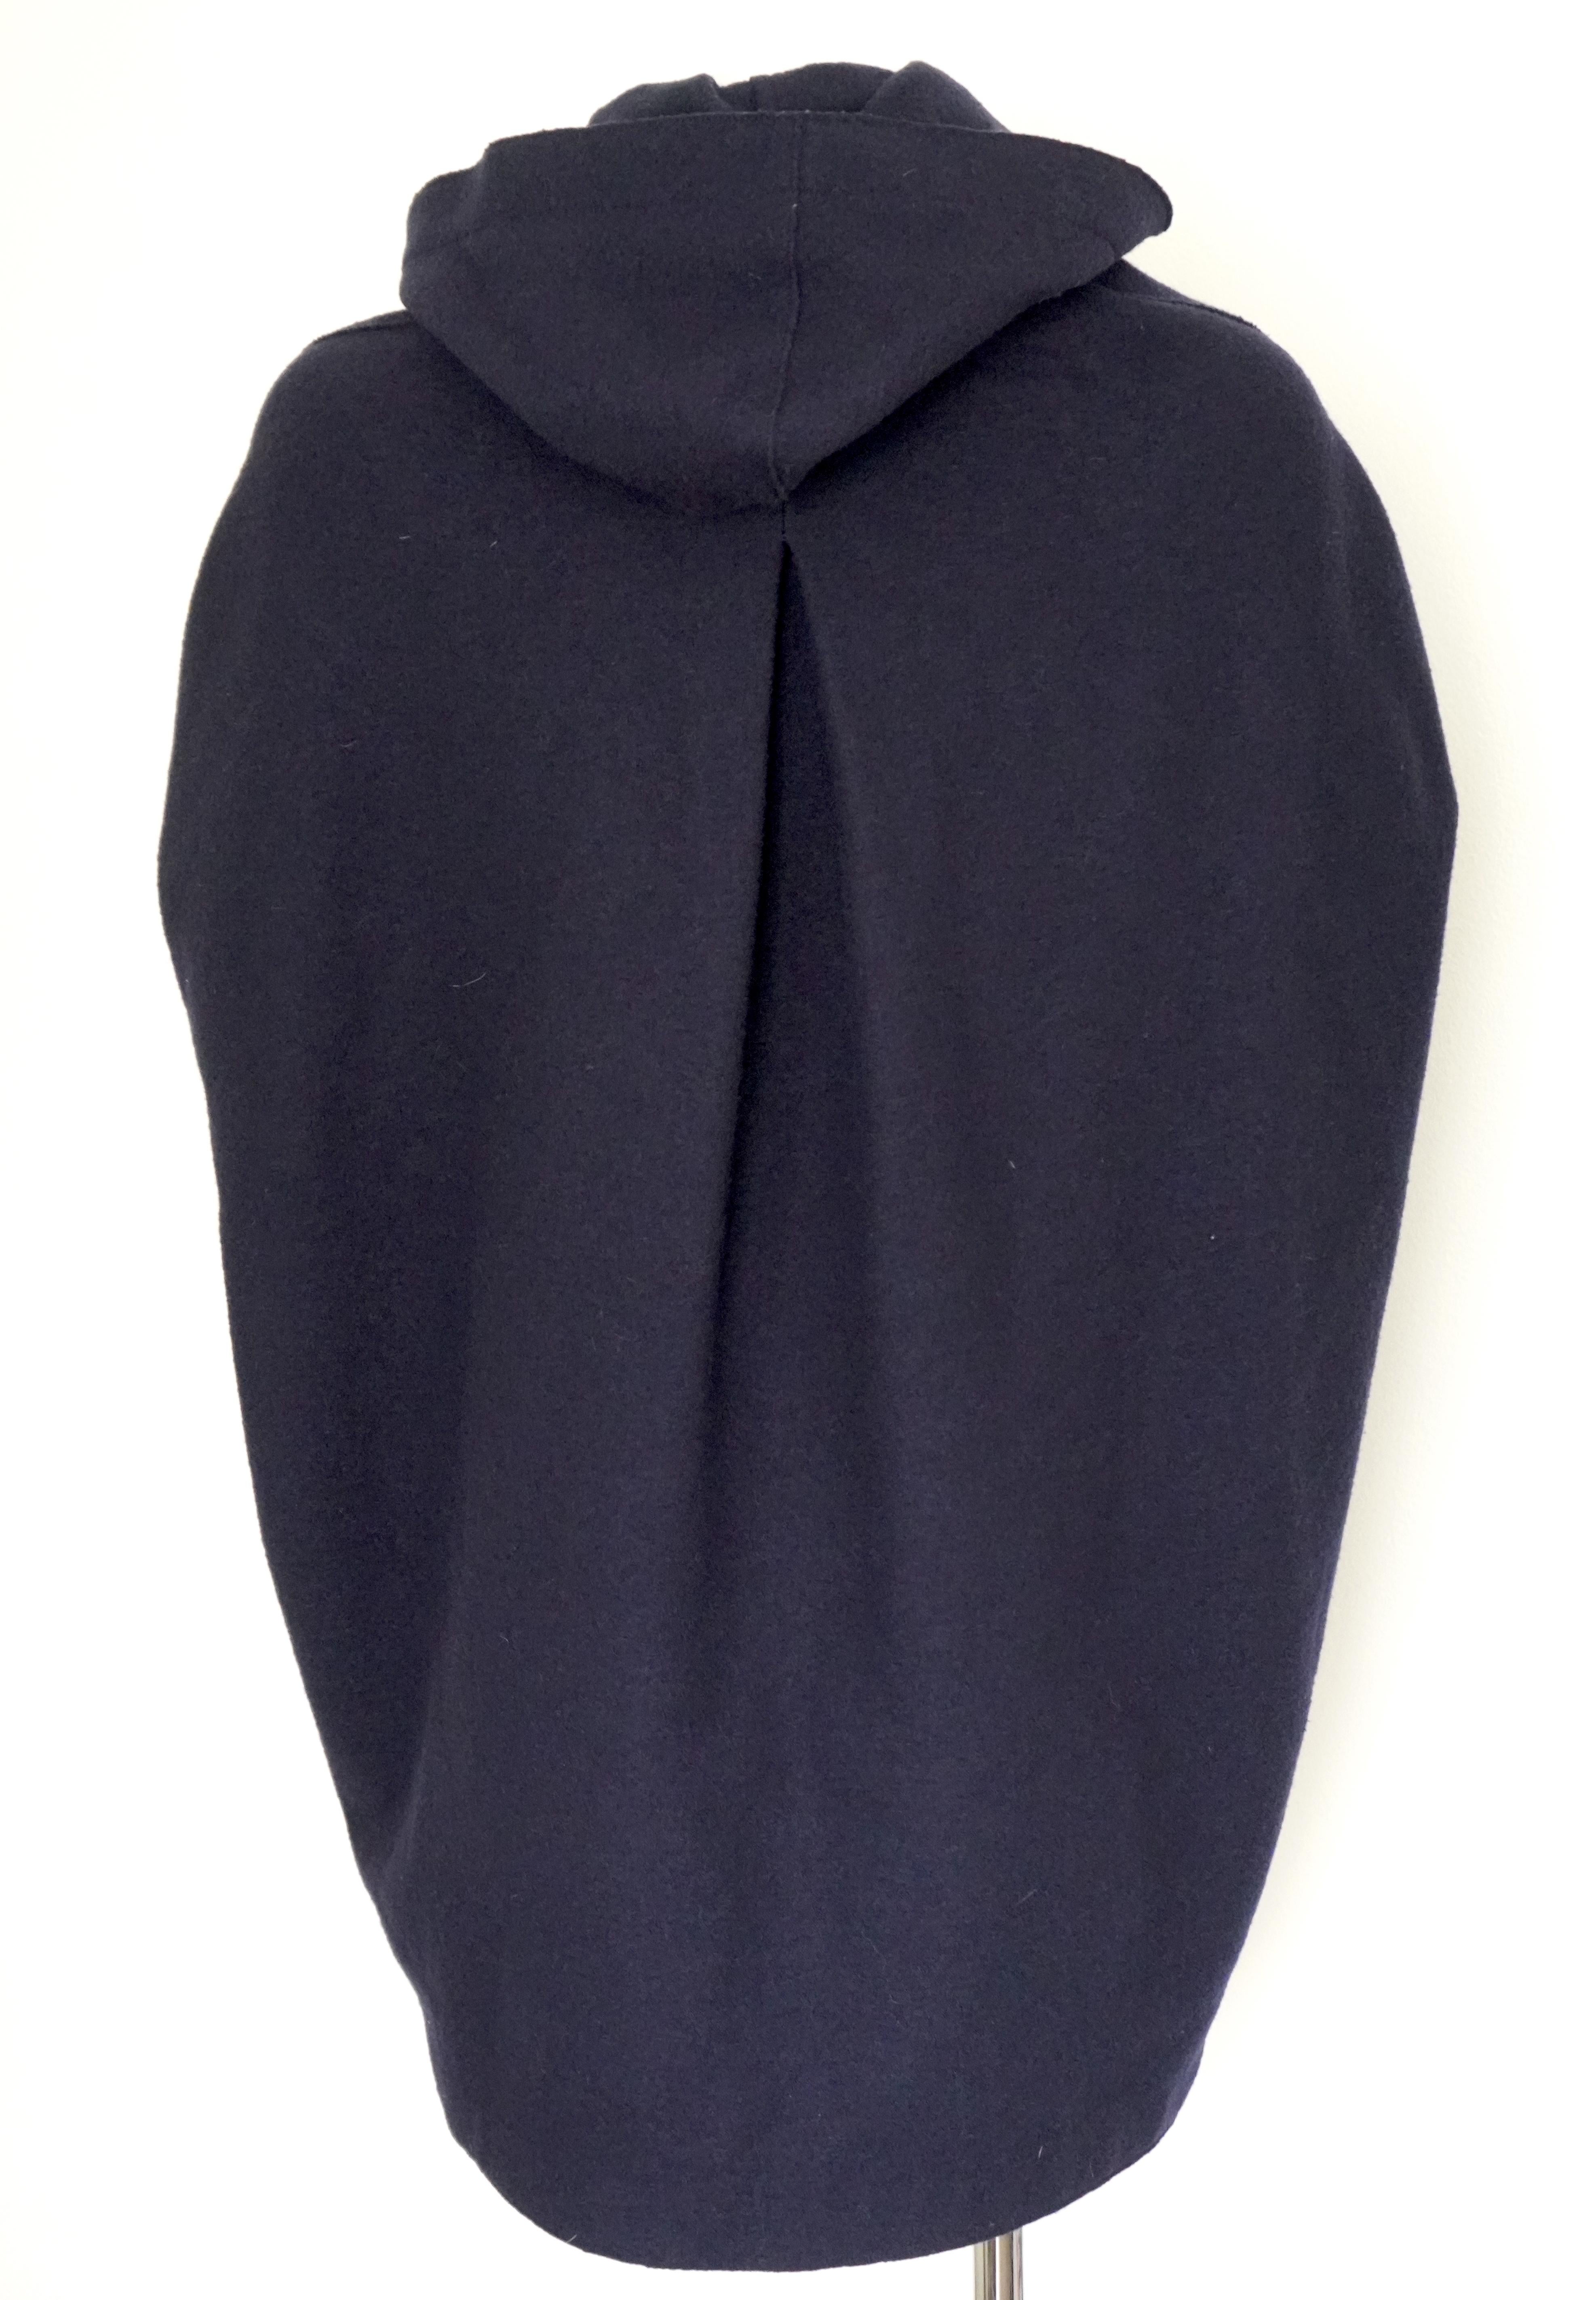 Lanvin Paris Navy Hooded Cape Coat  In Excellent Condition For Sale In Beverly Hills, CA